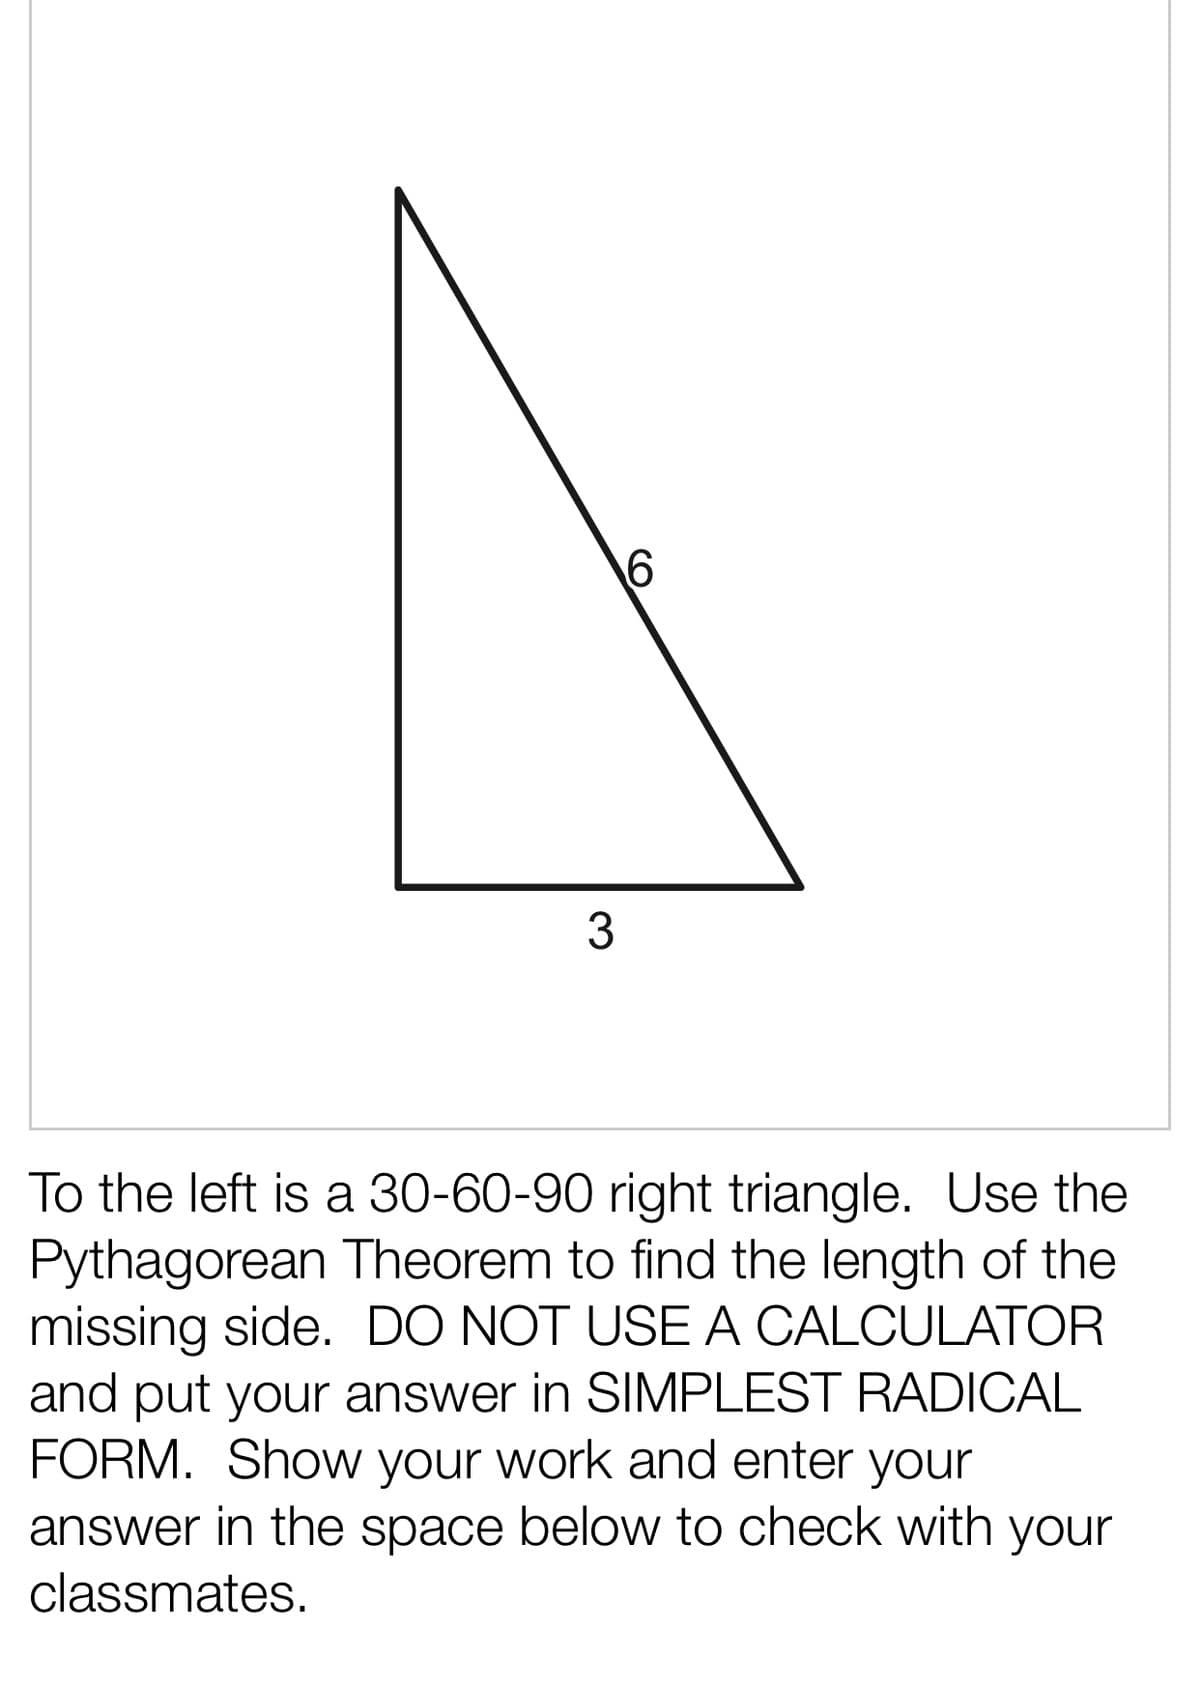 6
3
To the left is a 30-60-90 right triangle. Use the
Pythagorean Theorem to find the length of the
missing side. DO NOT USE A CALCULATOR
and put your answer in SIMPLEST RADICAL
FORM. Show your work and enter your
answer in the space below to check with your
classmates.
